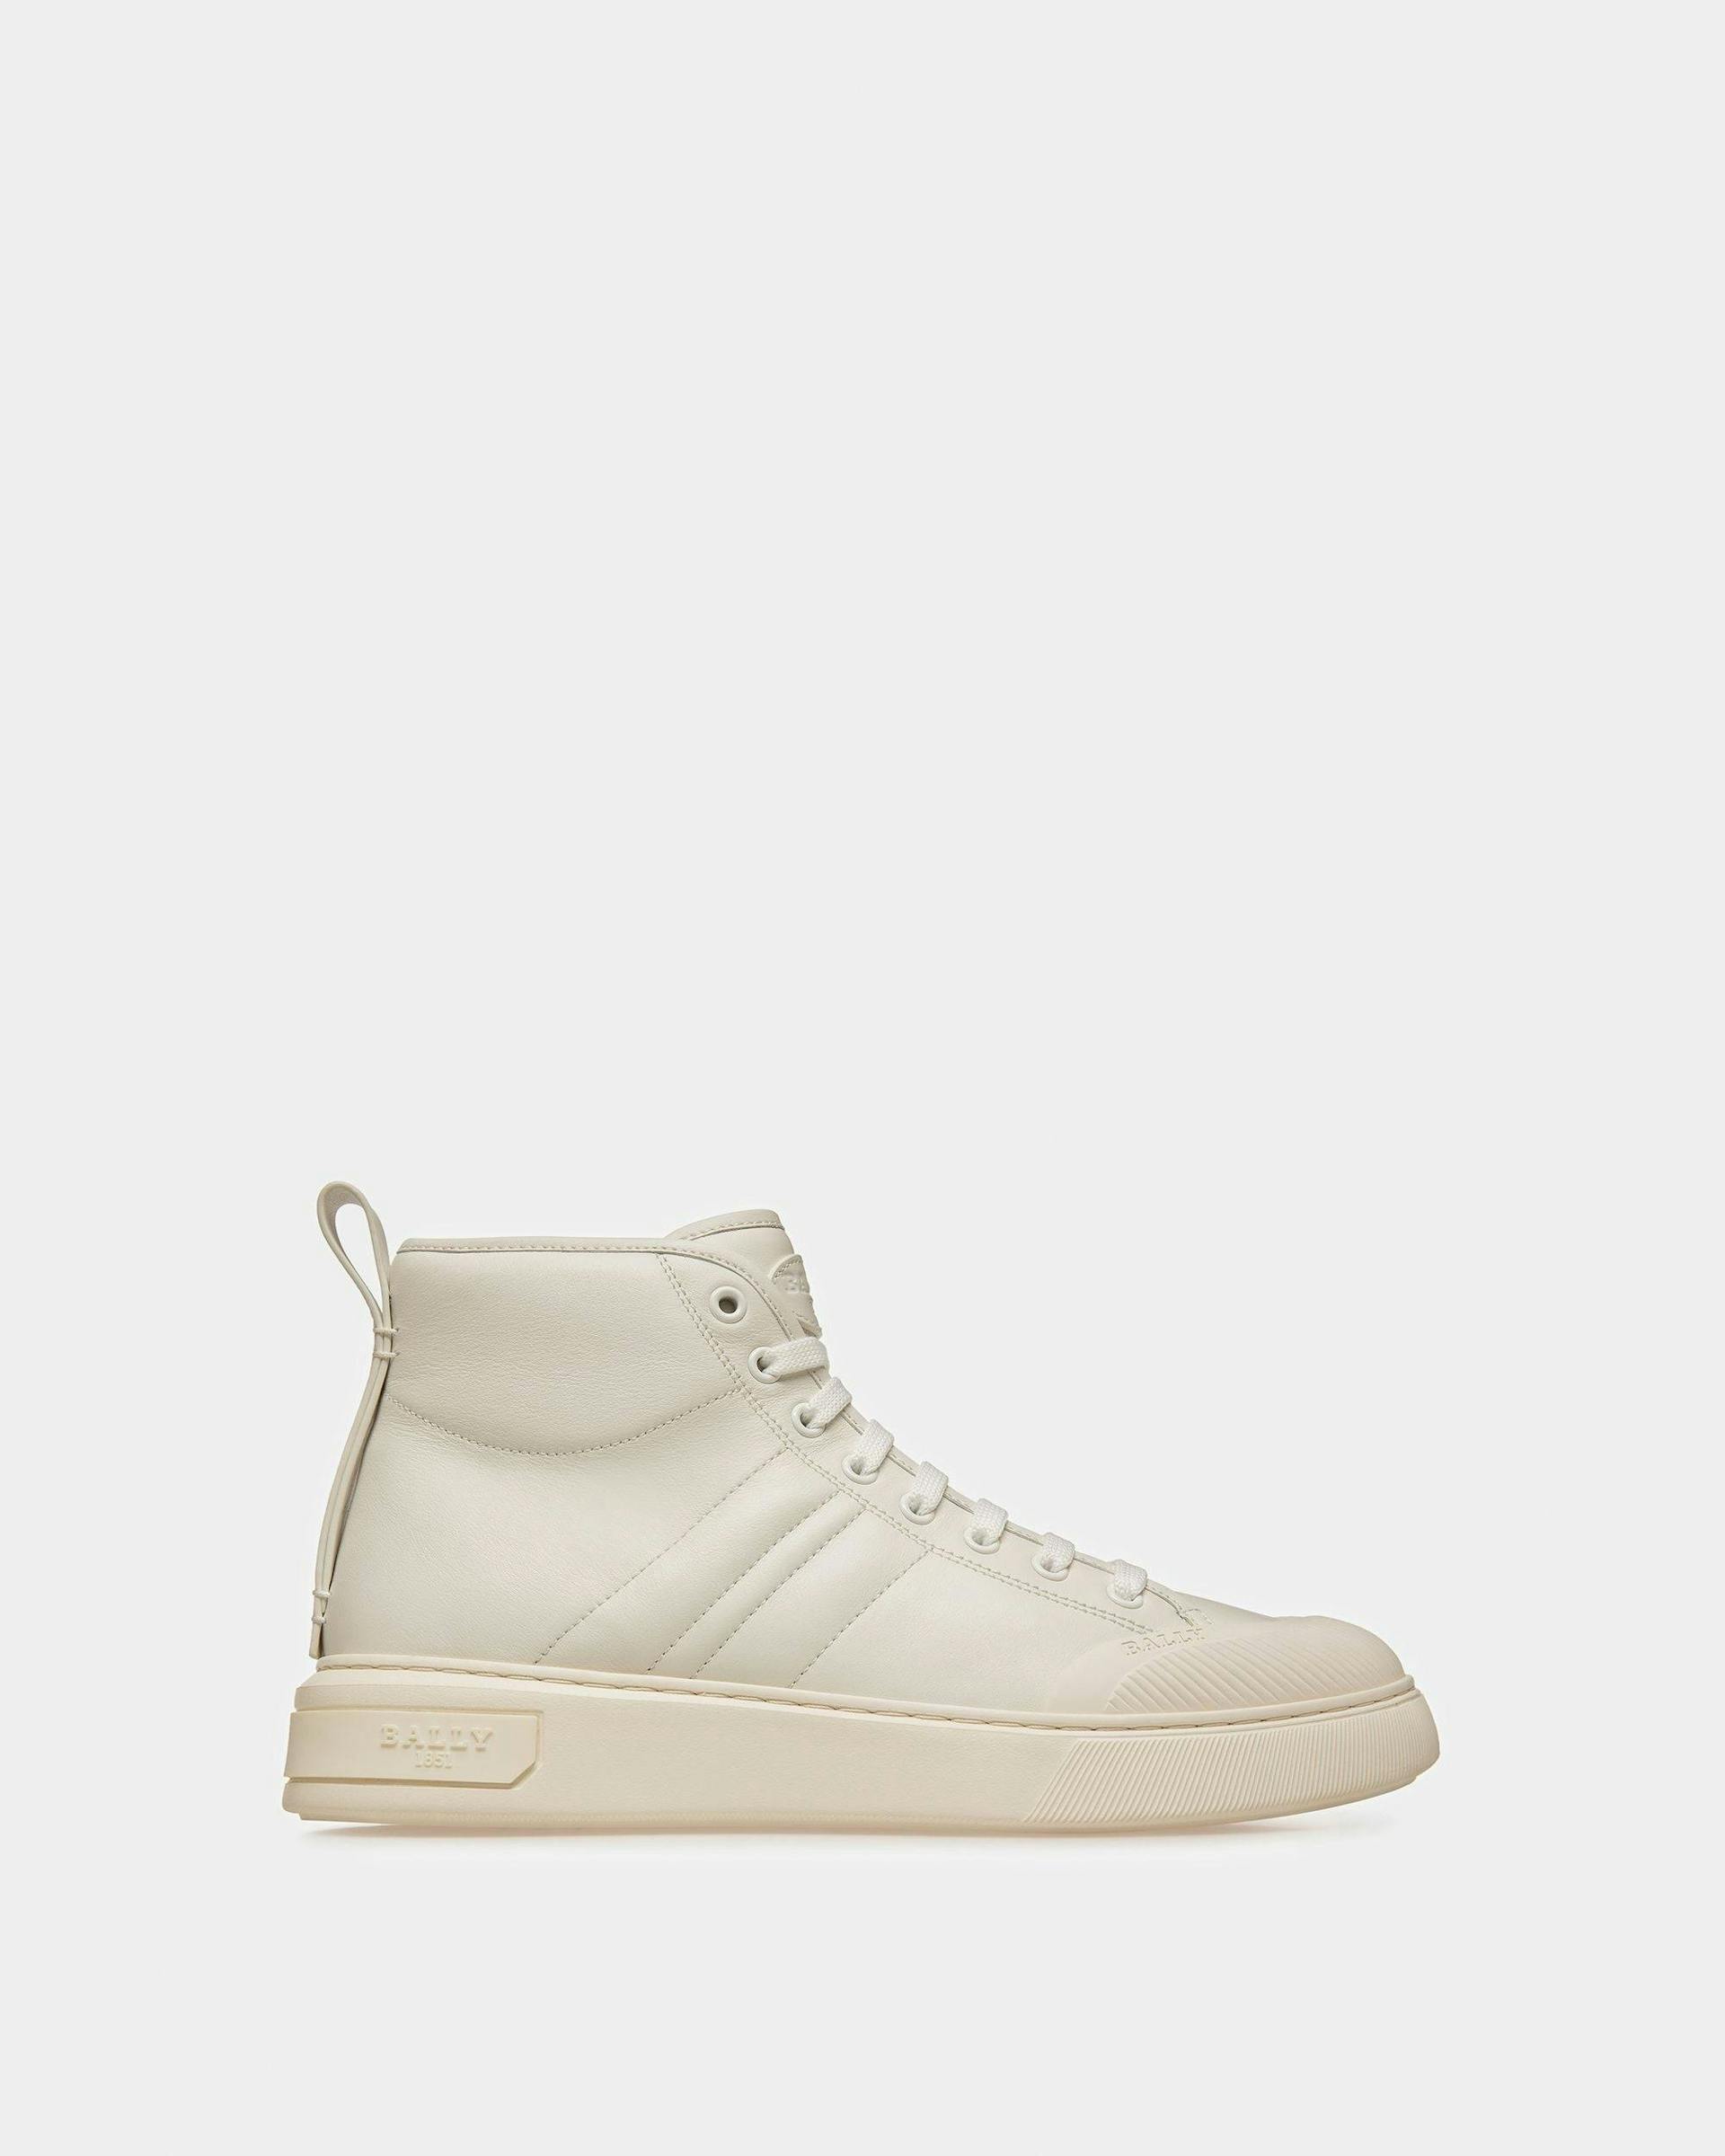 Maren Leather Sneakers In White - Women's - Bally - 01